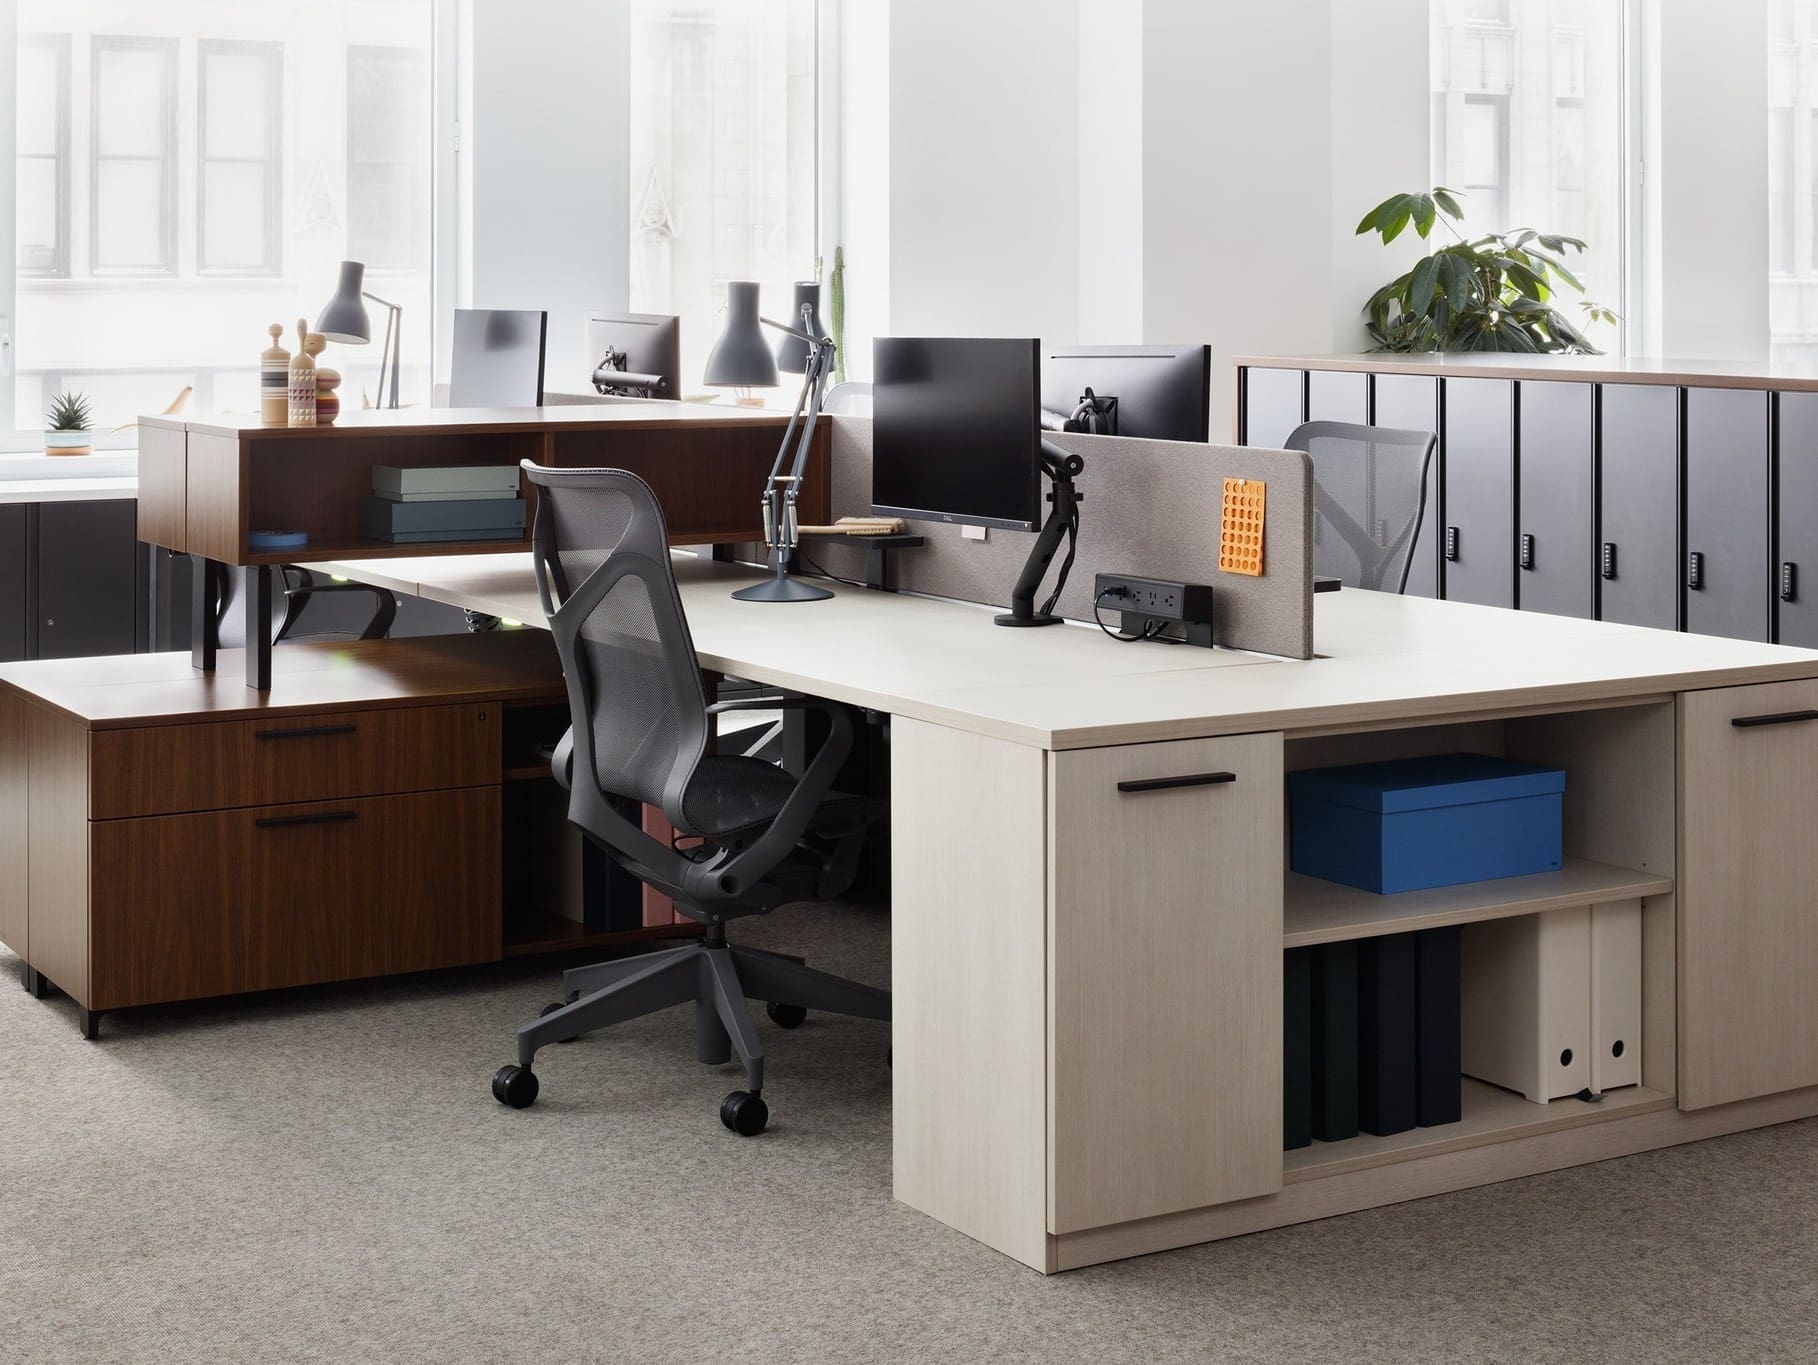 29 Ways to Organize Your Office Desk Furniture to Increase Productivity